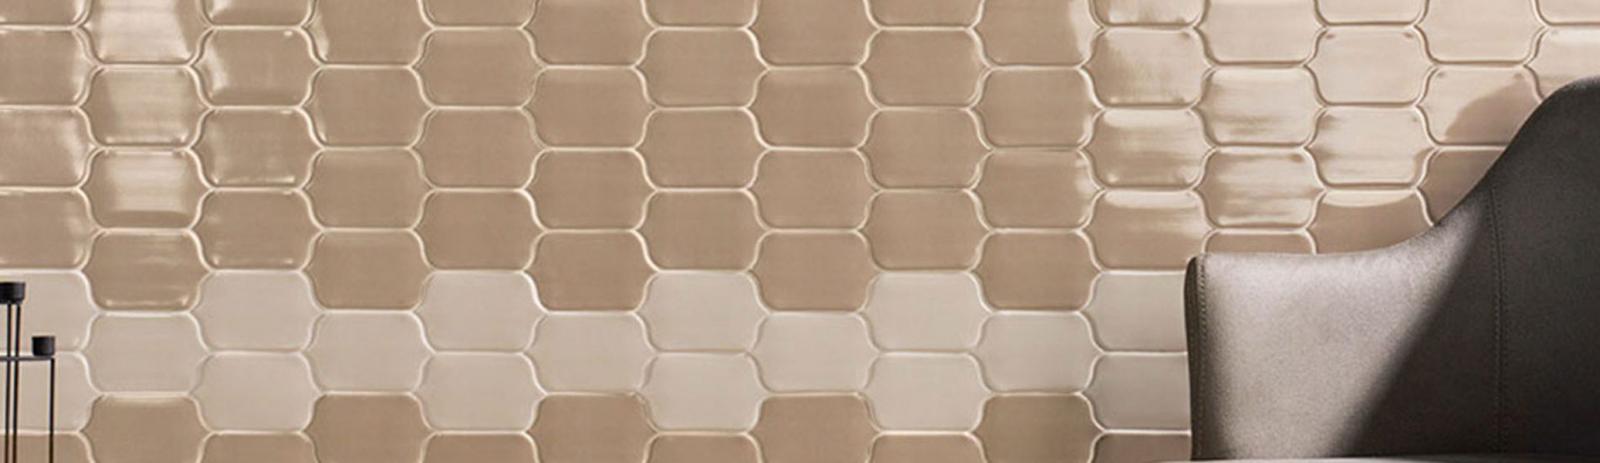 banner-riad-natucer-wall-tile-extruded-1900x550